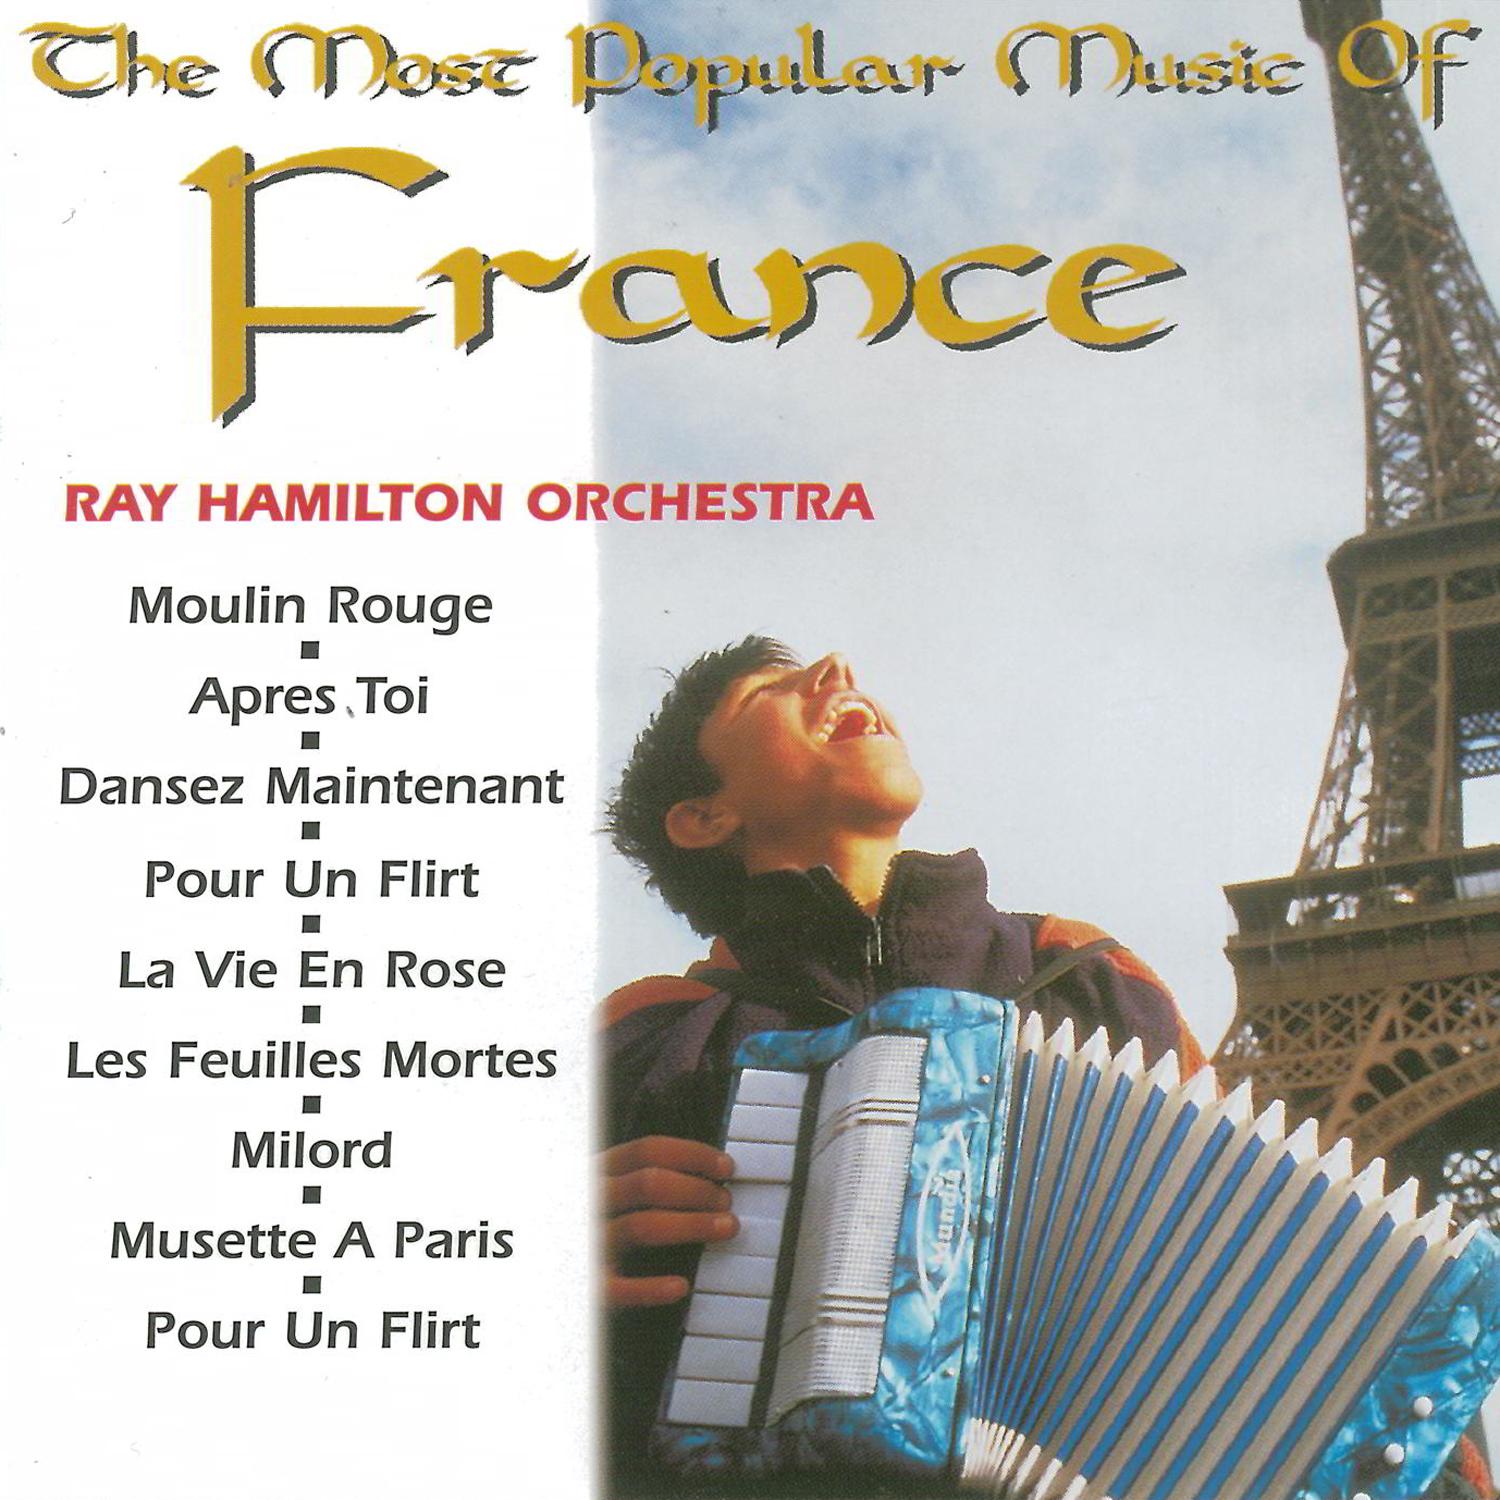 The Most Popular Music of France